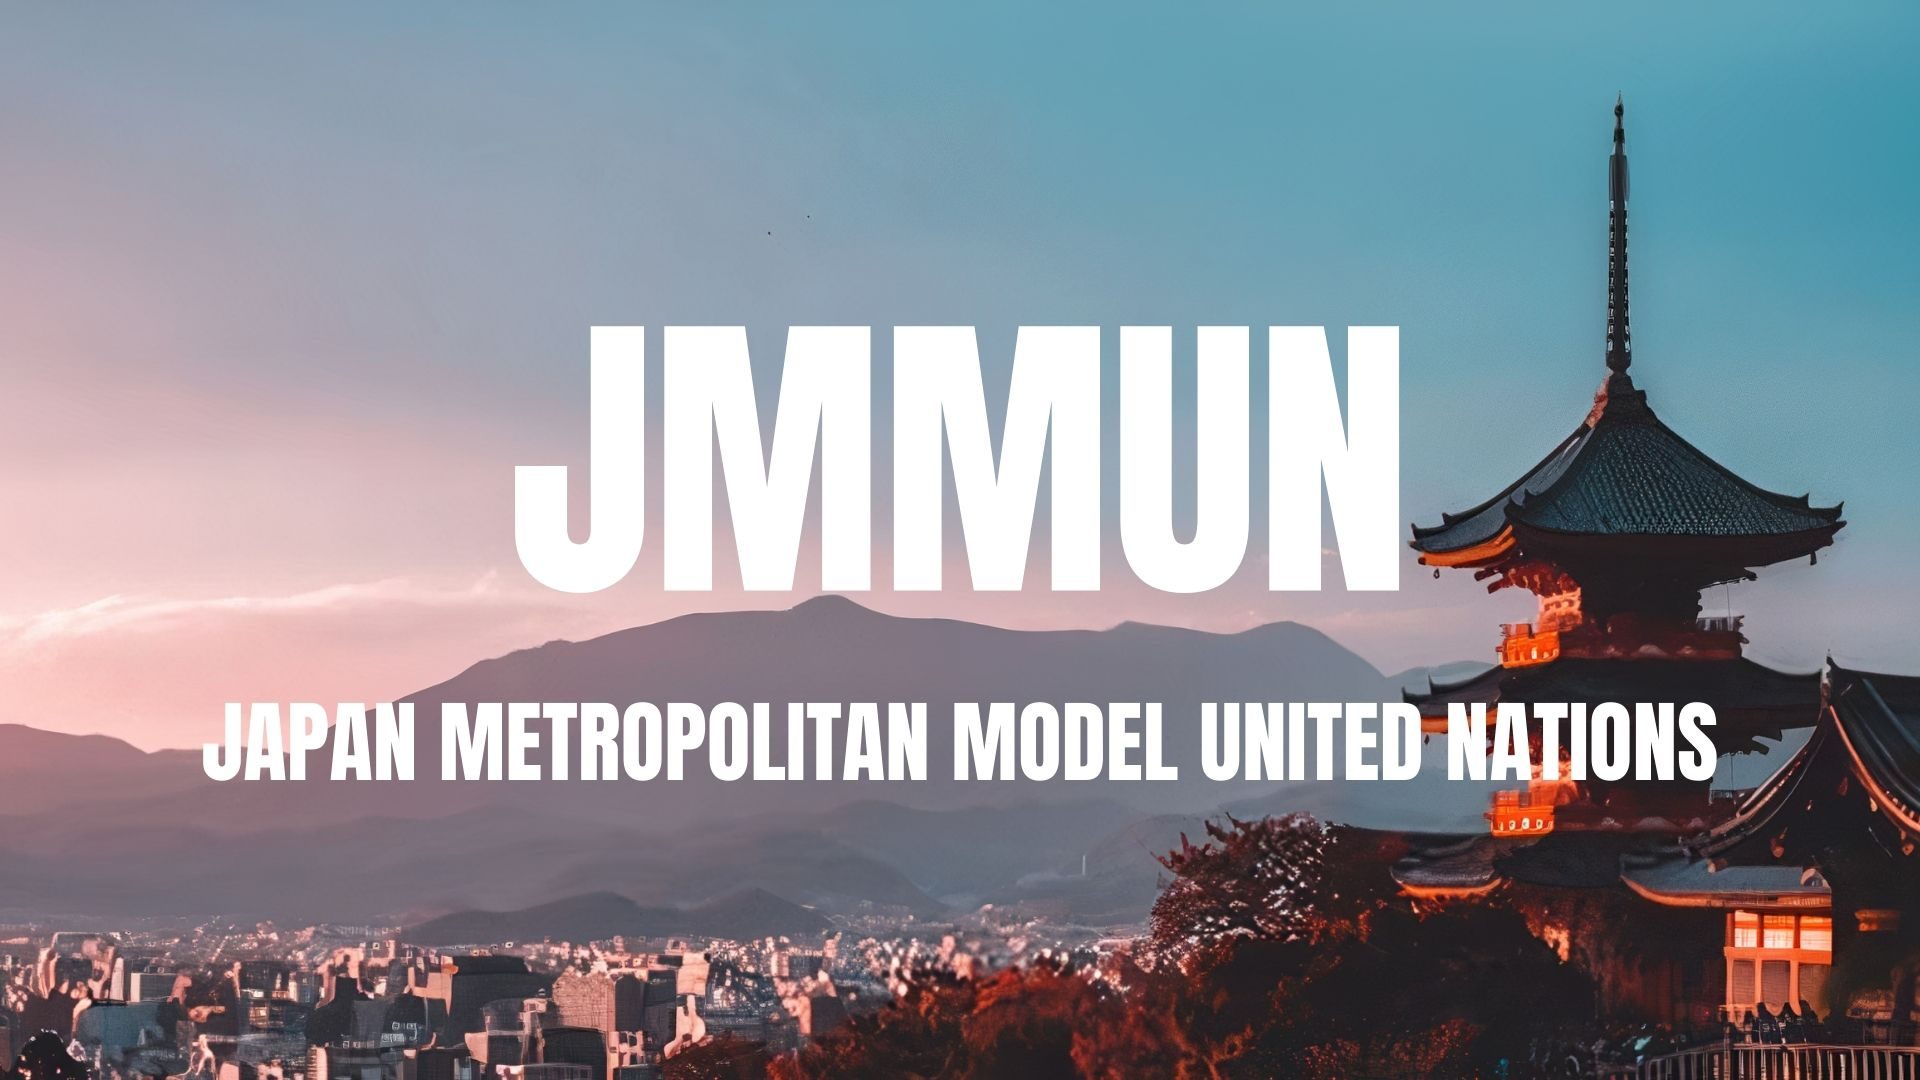 JMMUN Times is now published!